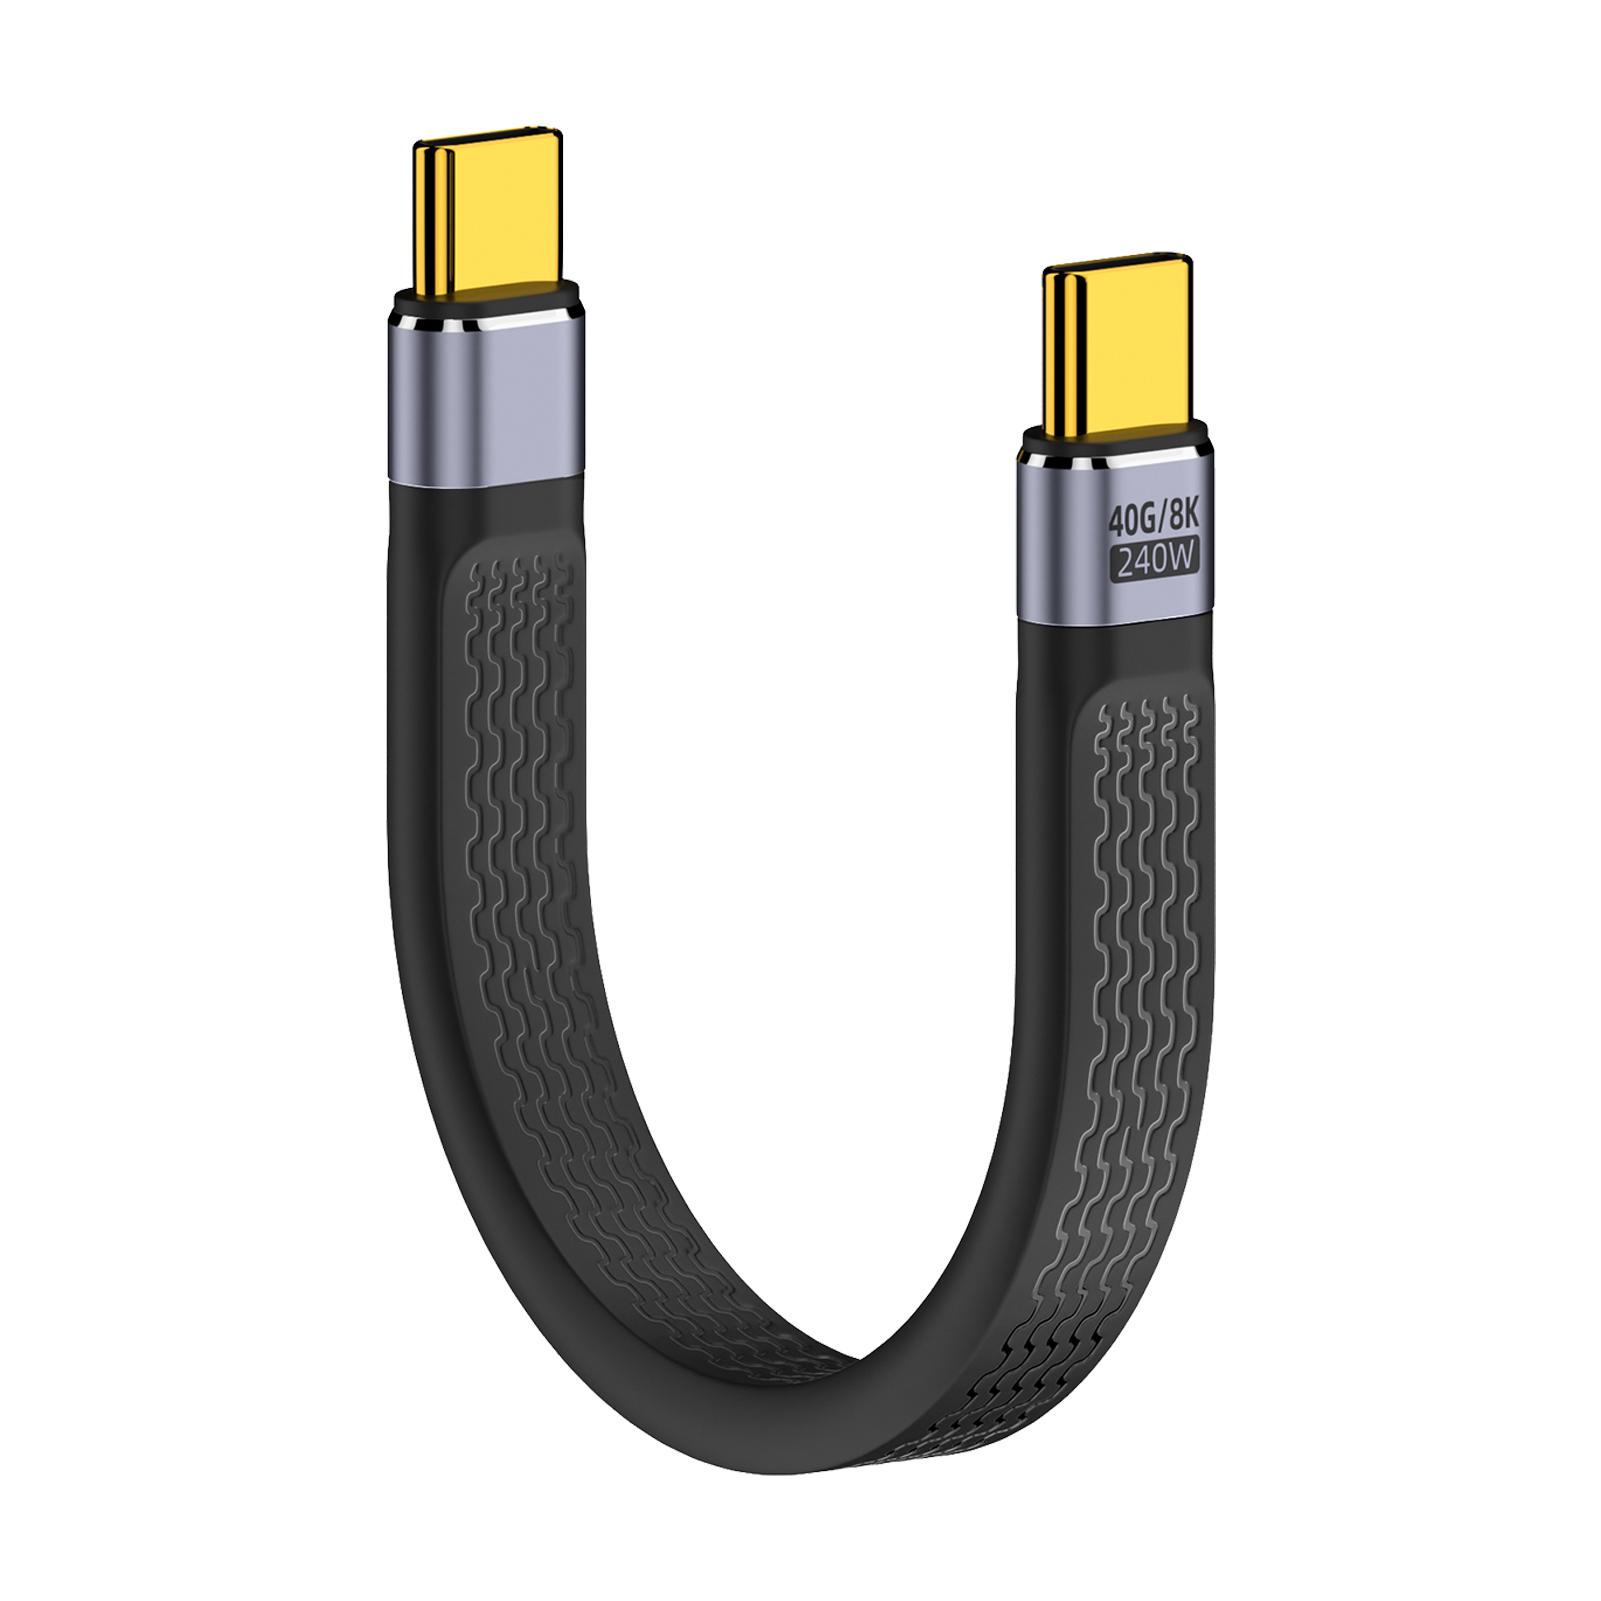 Short USB C To USB C Cable USB 4.0 40Gbps Data Cable Flat FPC Design Supporting 8K Display 240W Fast Charge Cable